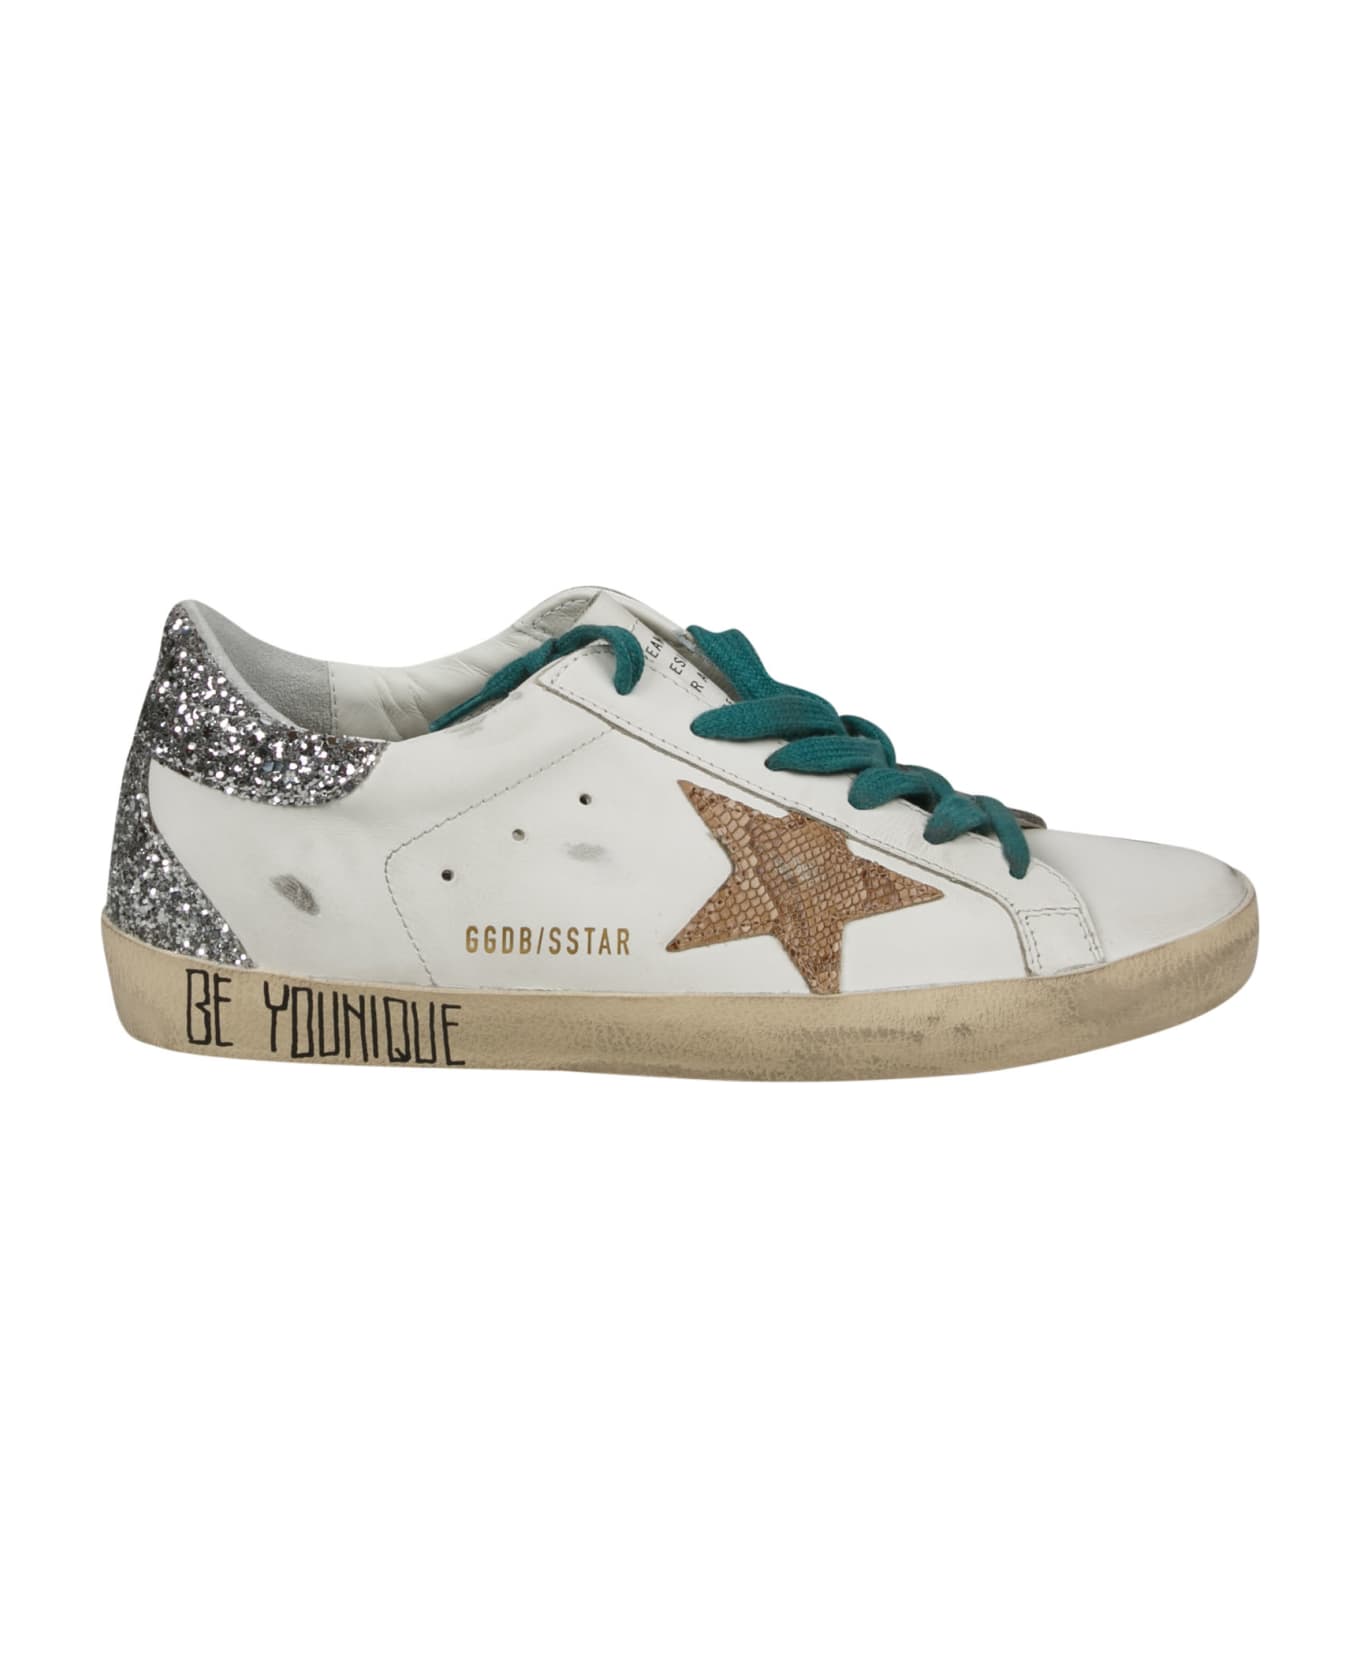 Golden Goose Super-star Classic Sneakers - White/Taupe